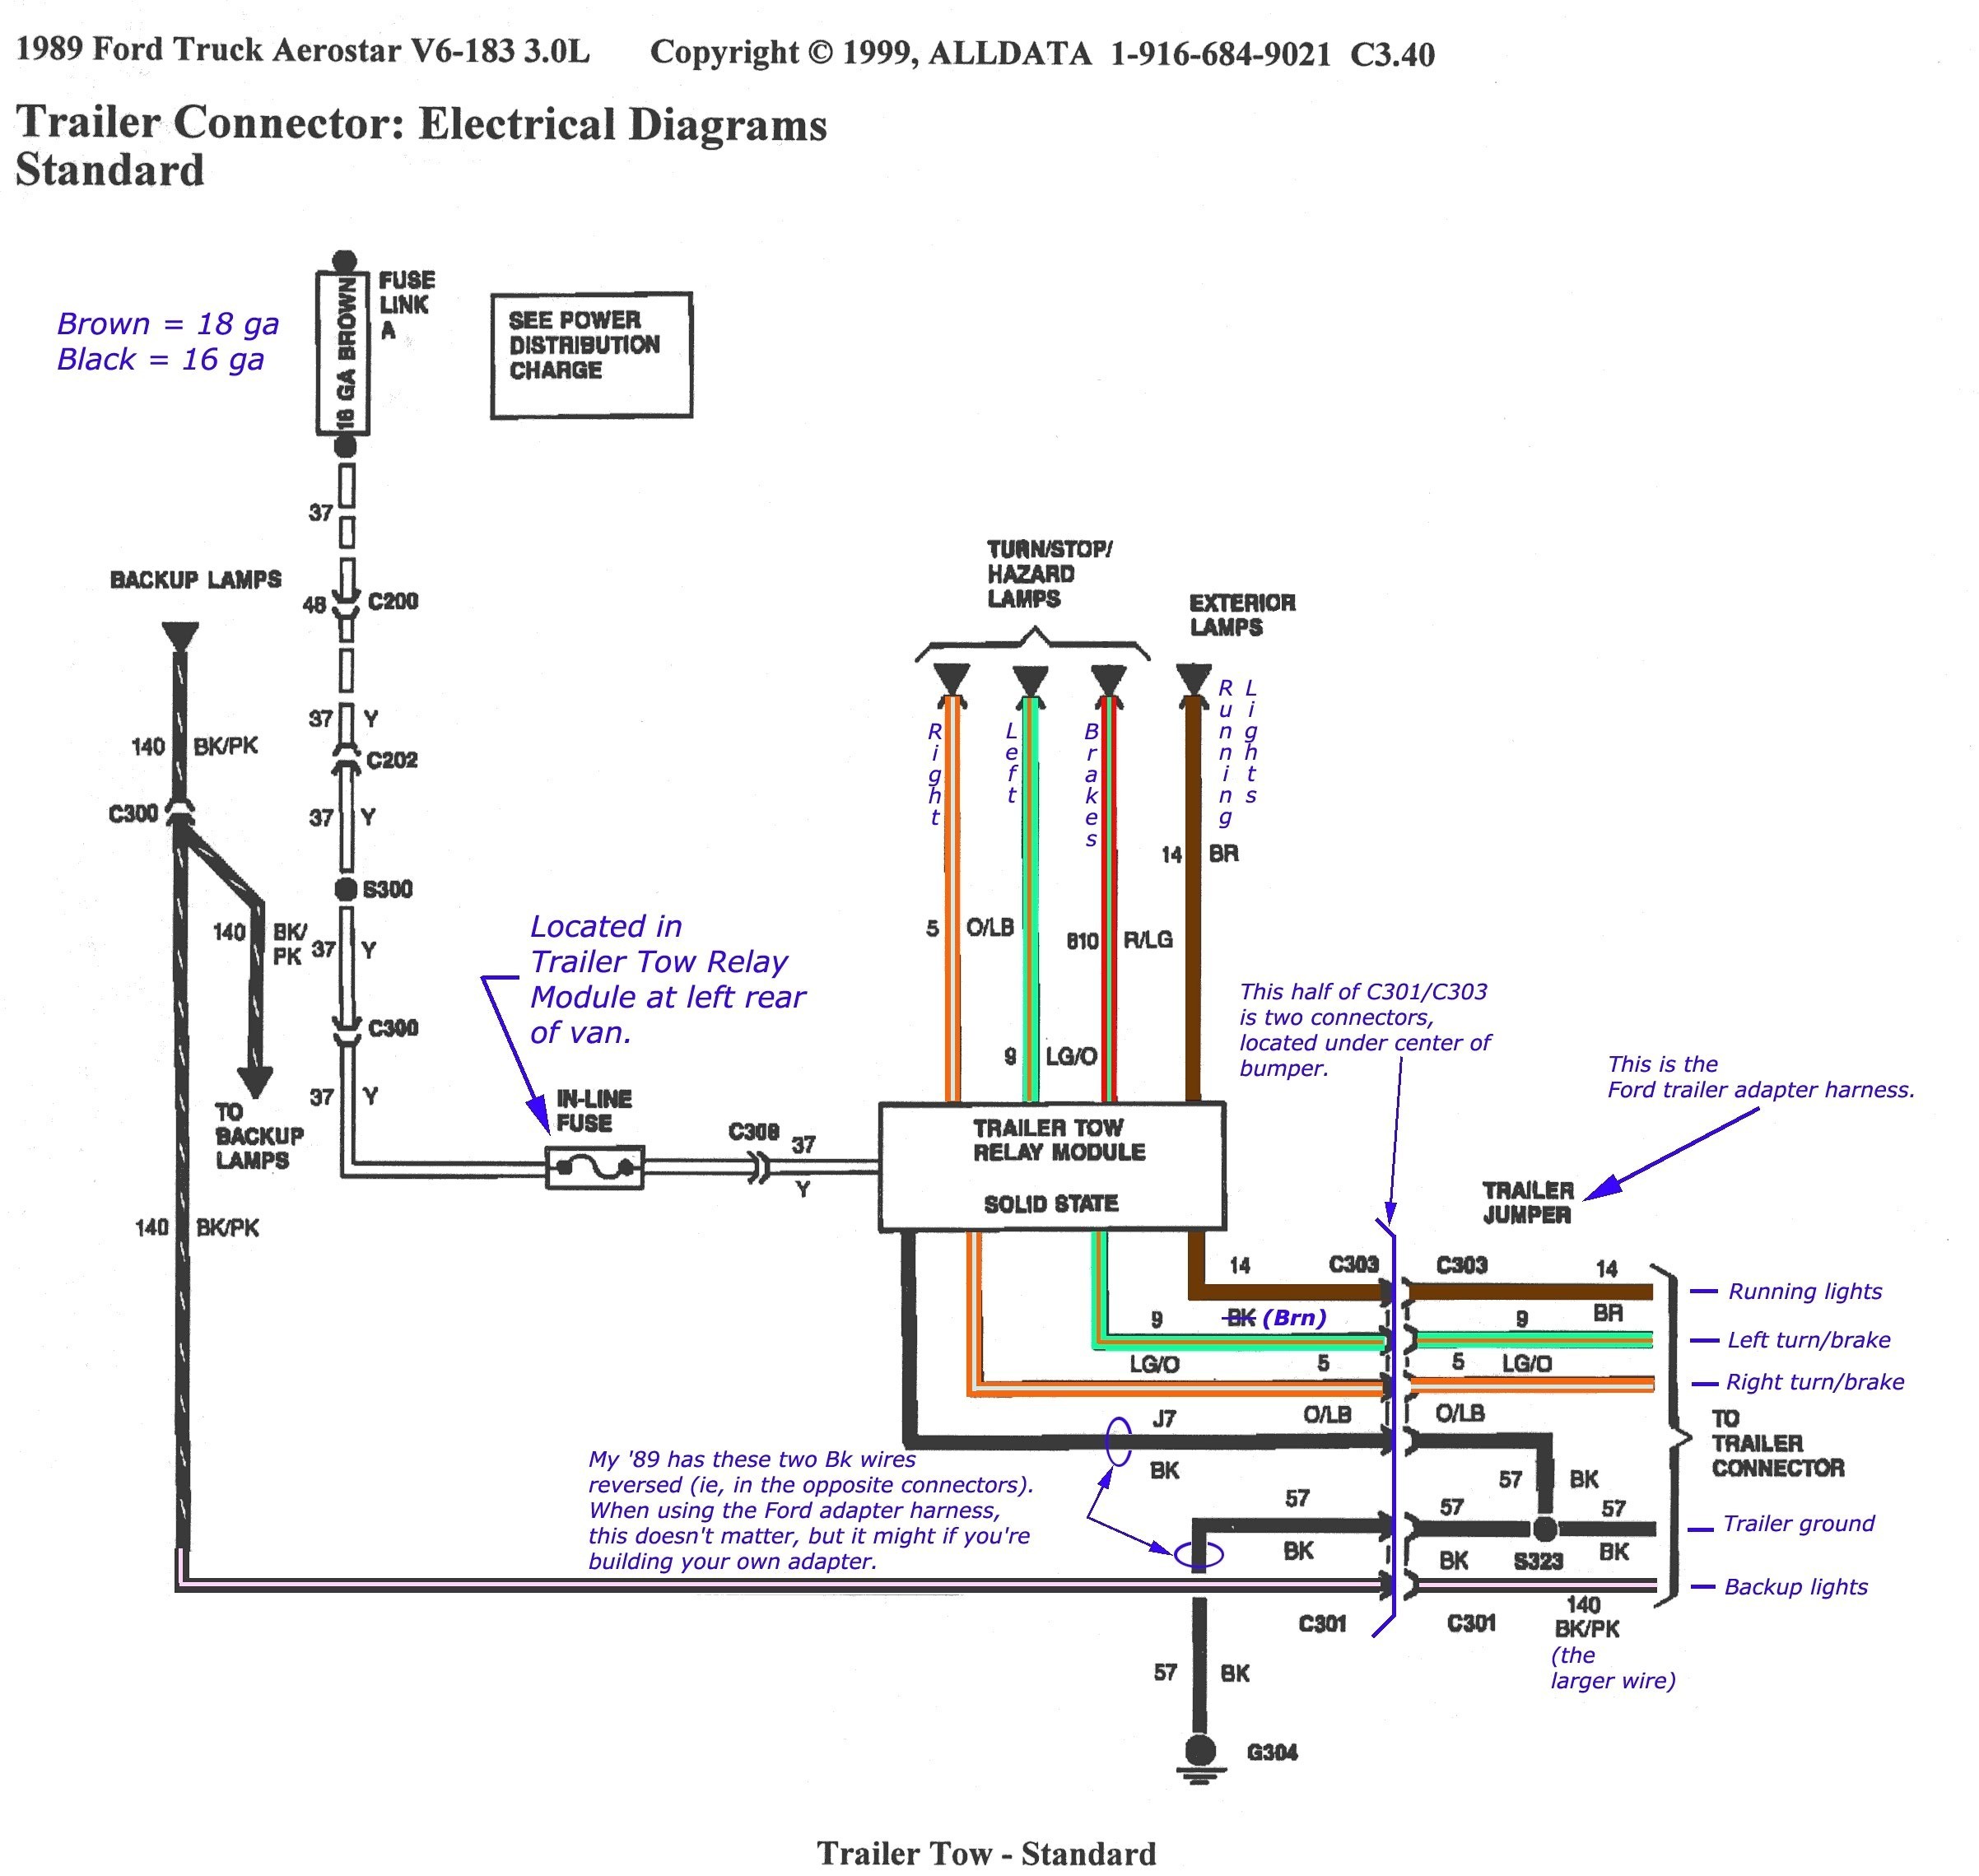 Commercial Trailer Tail Light Wiring Diagram from mainetreasurechest.com